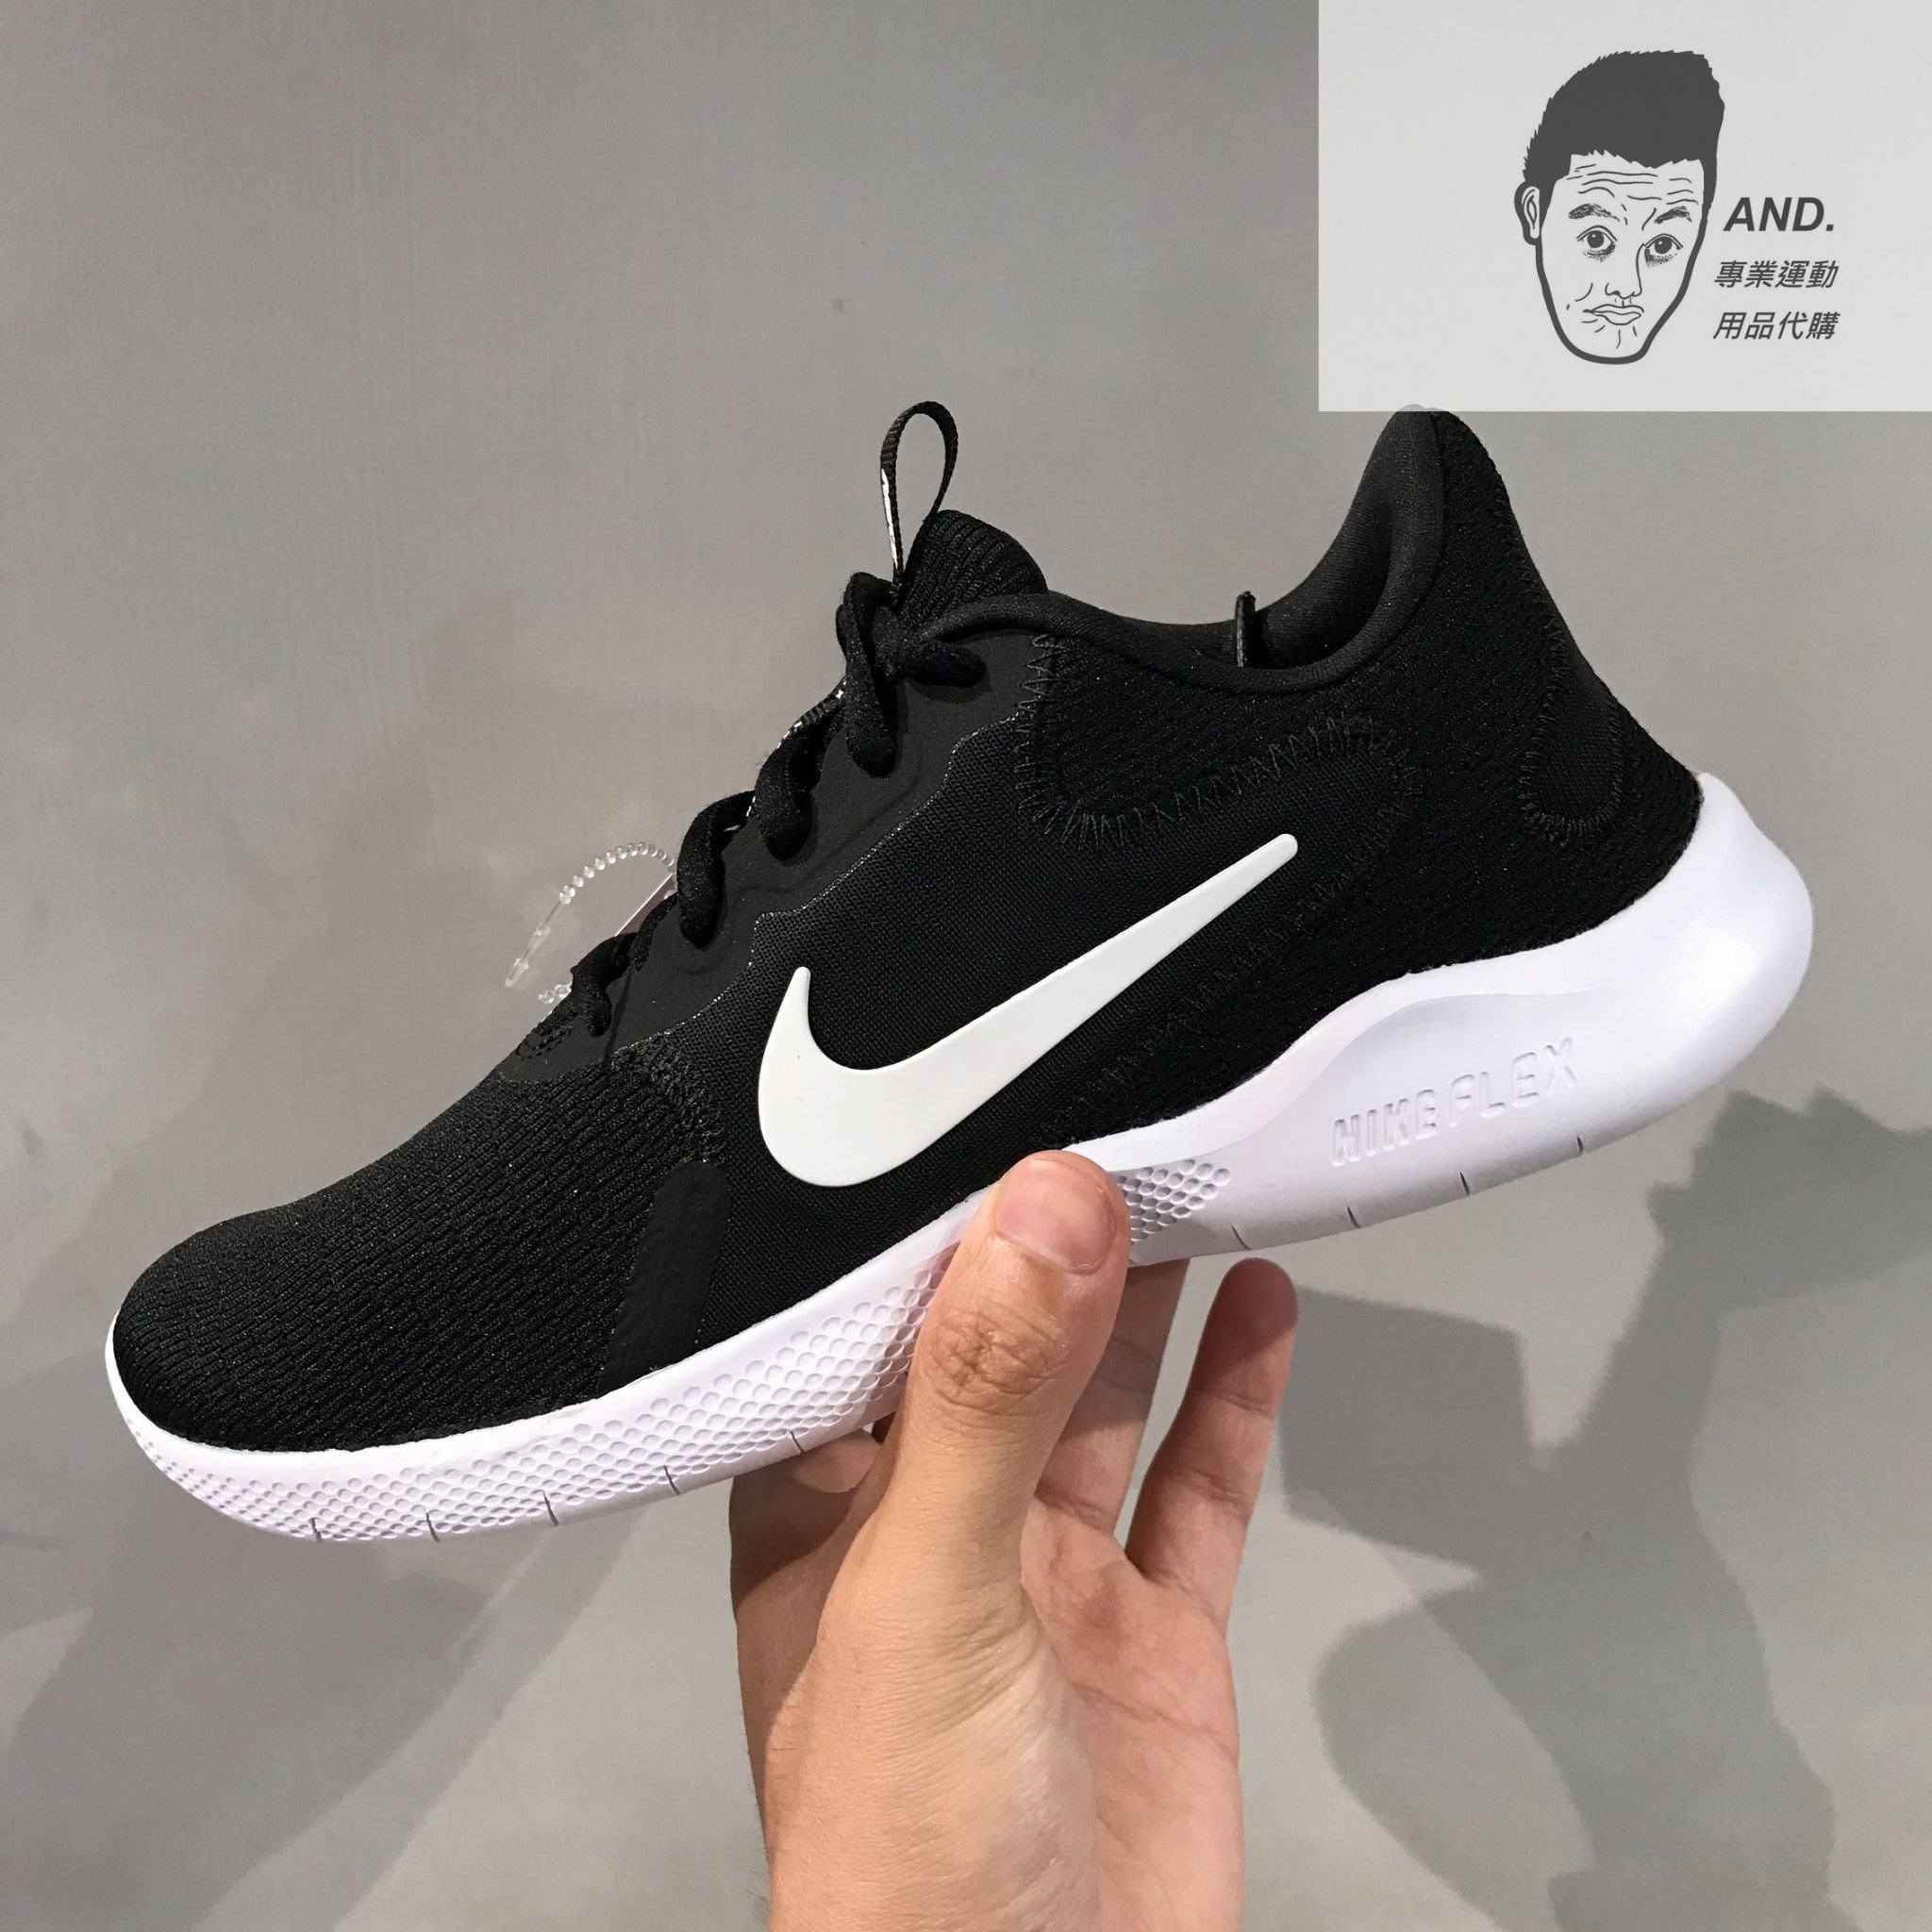 AND.】NIKE FLEX EXPERIENCE RN 9 黑白運動 